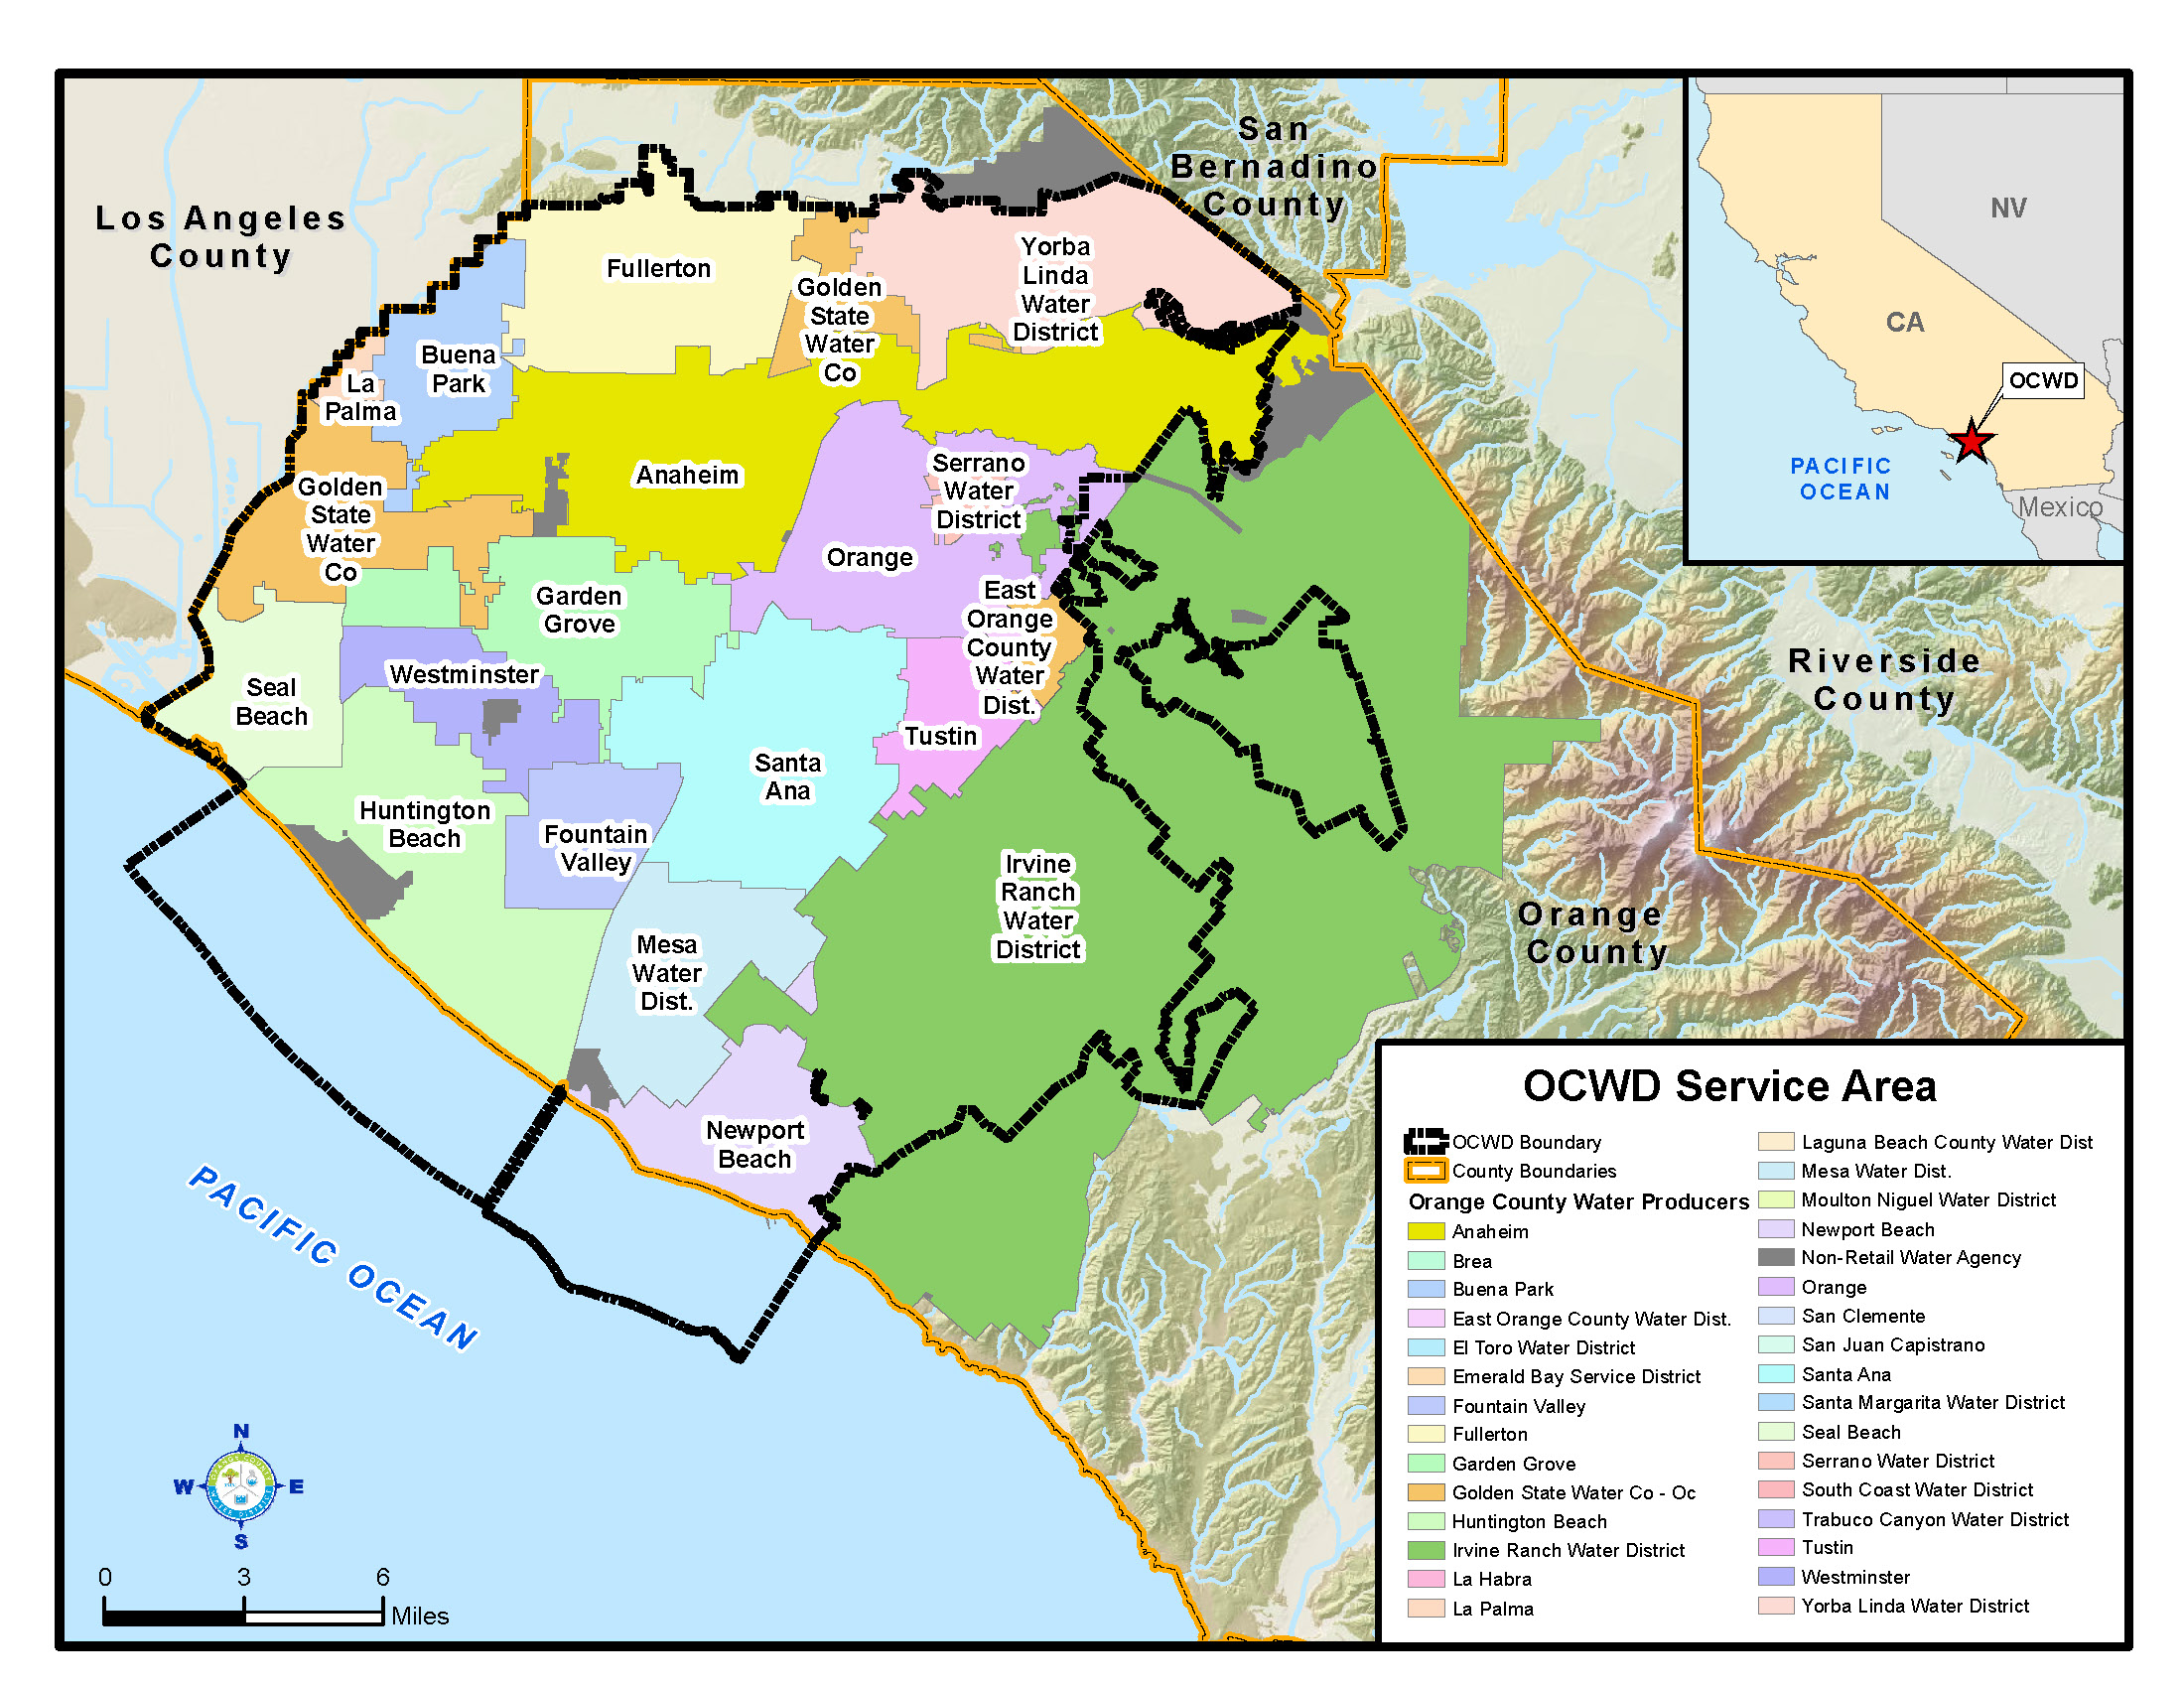 irwd-irvine-ranch-water-district-sources-use-reduction-and-rates